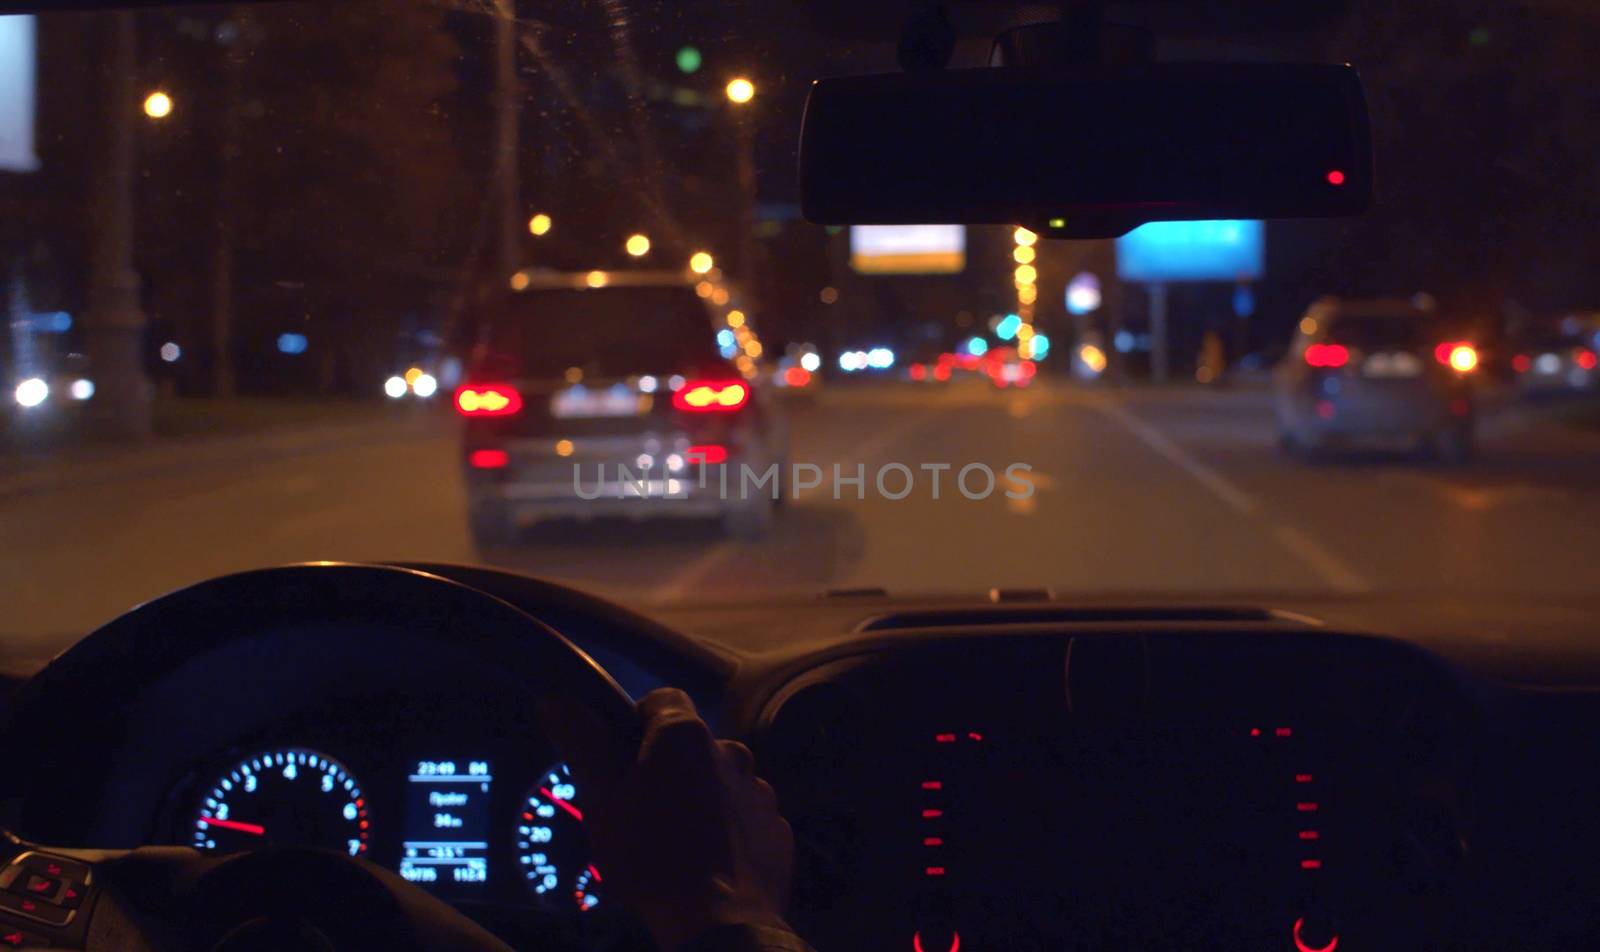 Close up man's hands on the steering wheel. Dashboard lights up inside the dark interior of a car. POV night driving.